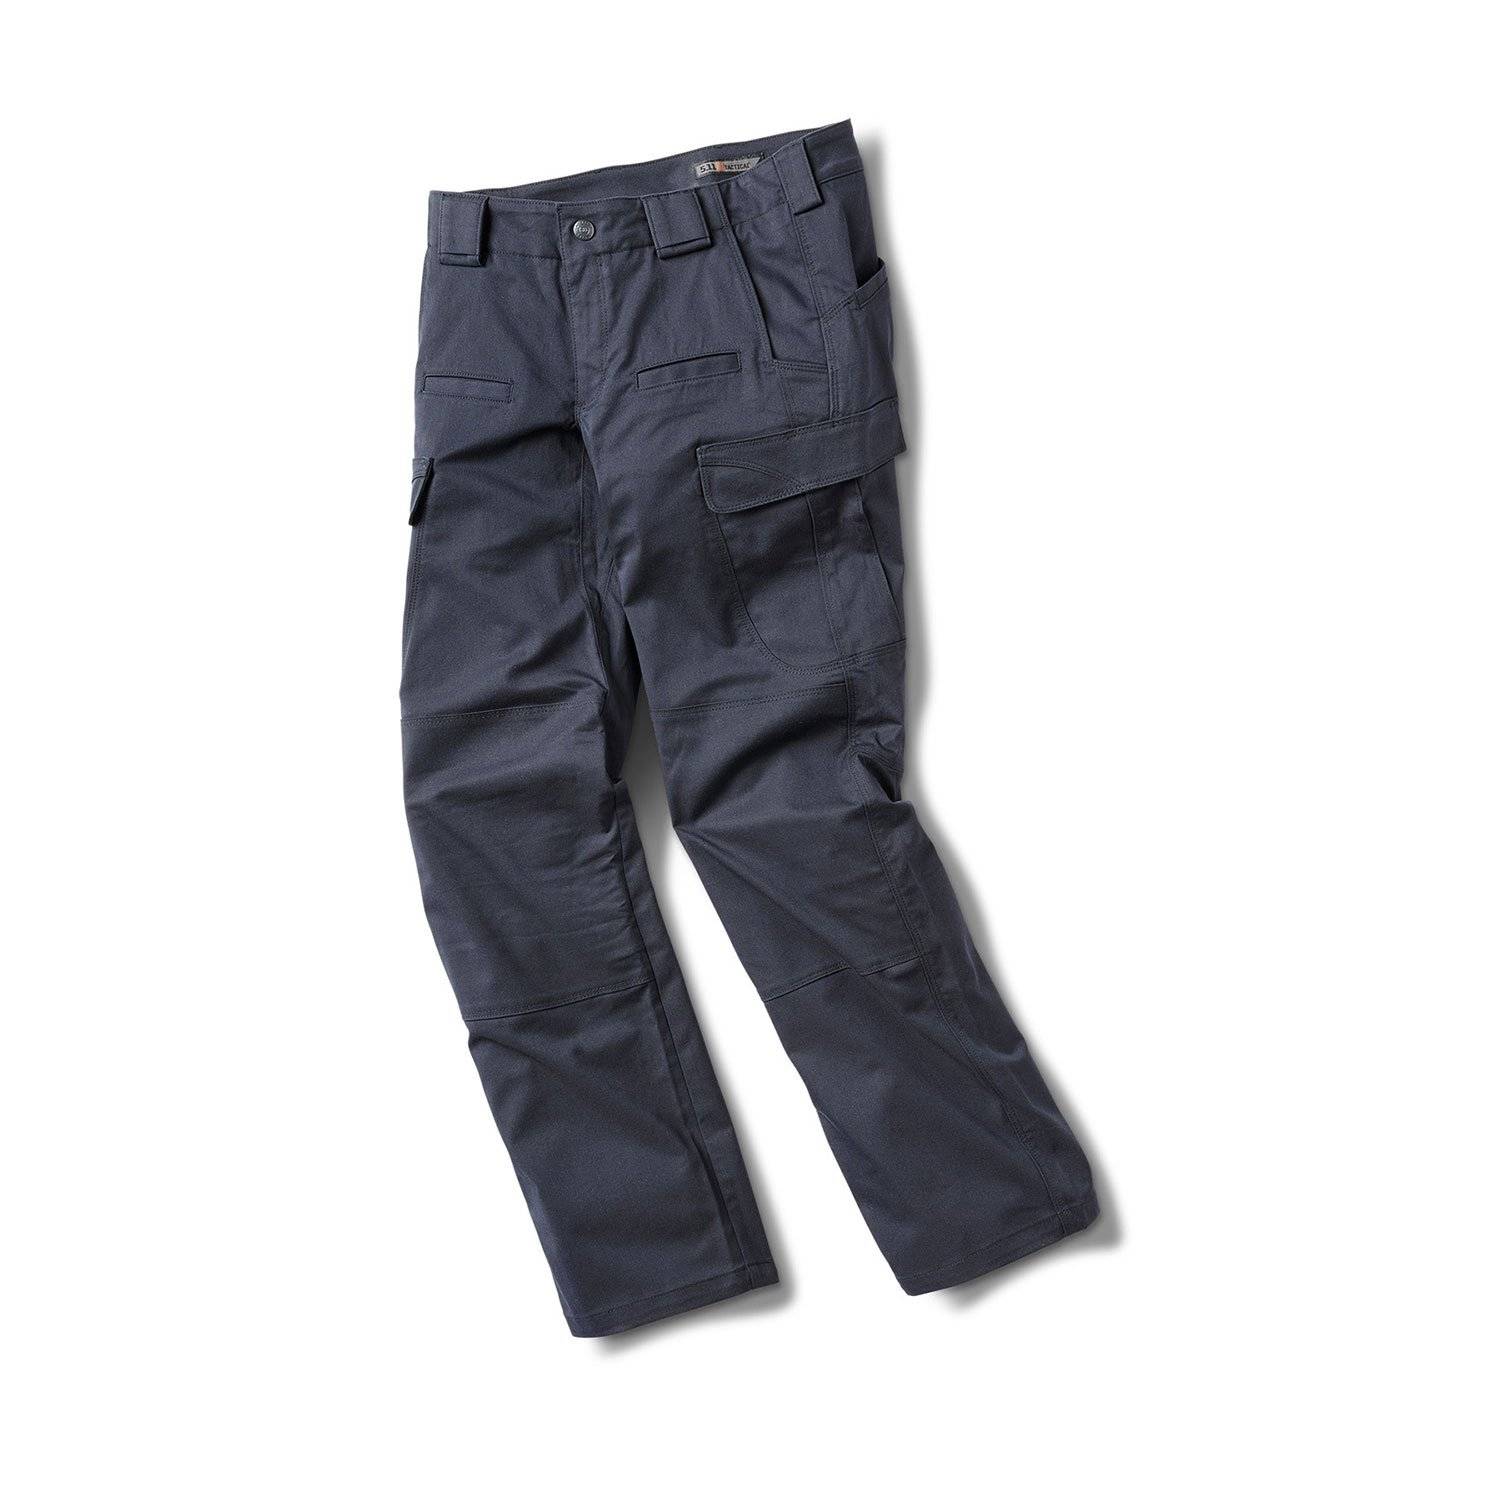 5.11 Tactical Mens NYPD Twill Stryke Pant